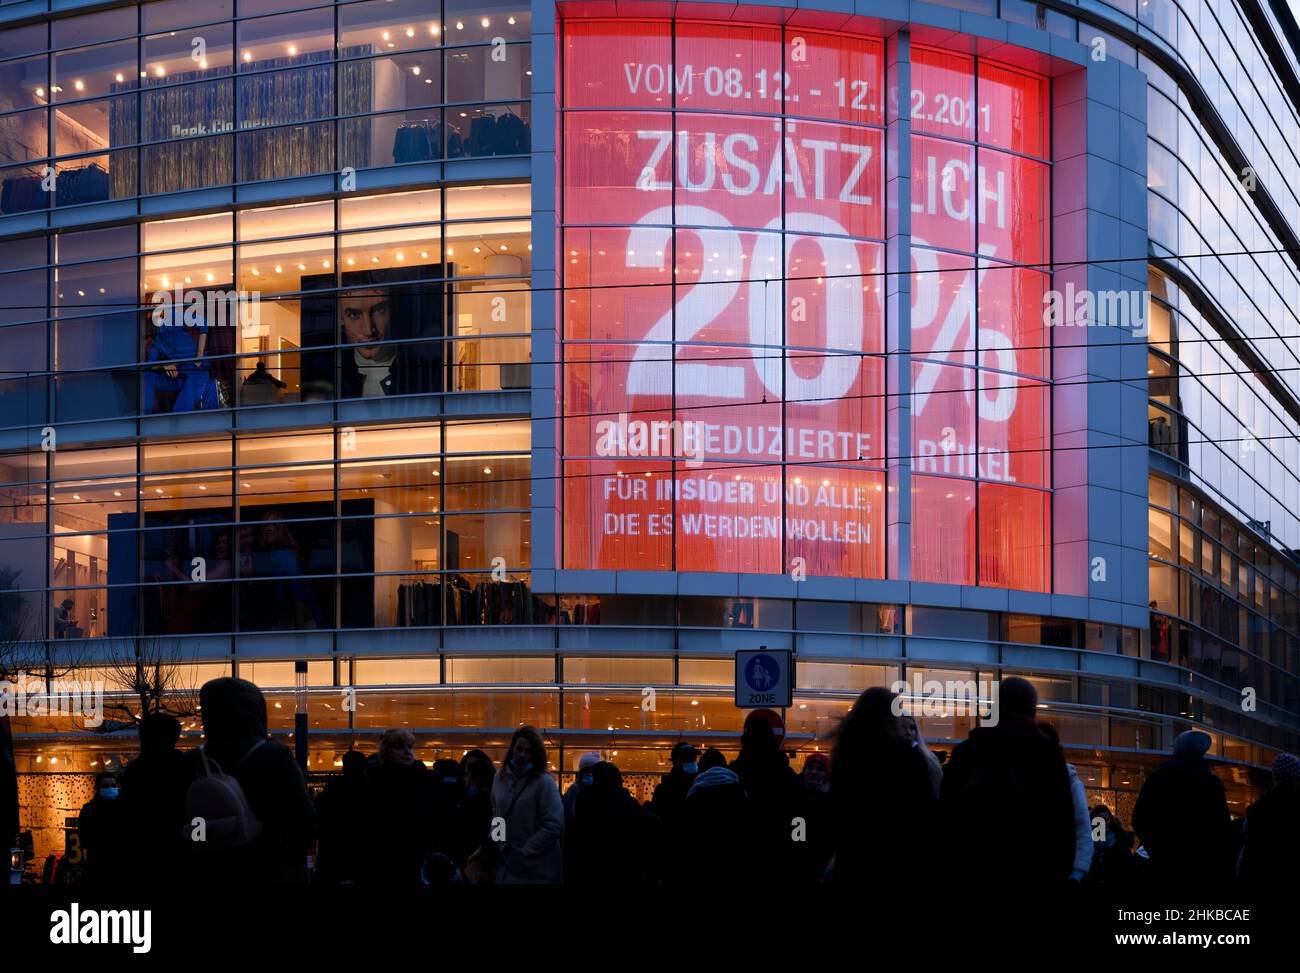 A shopping mall offers 20% discount in the city center of Düsseldorf, NRW, Germany on 11/12/2021. Stock Photo